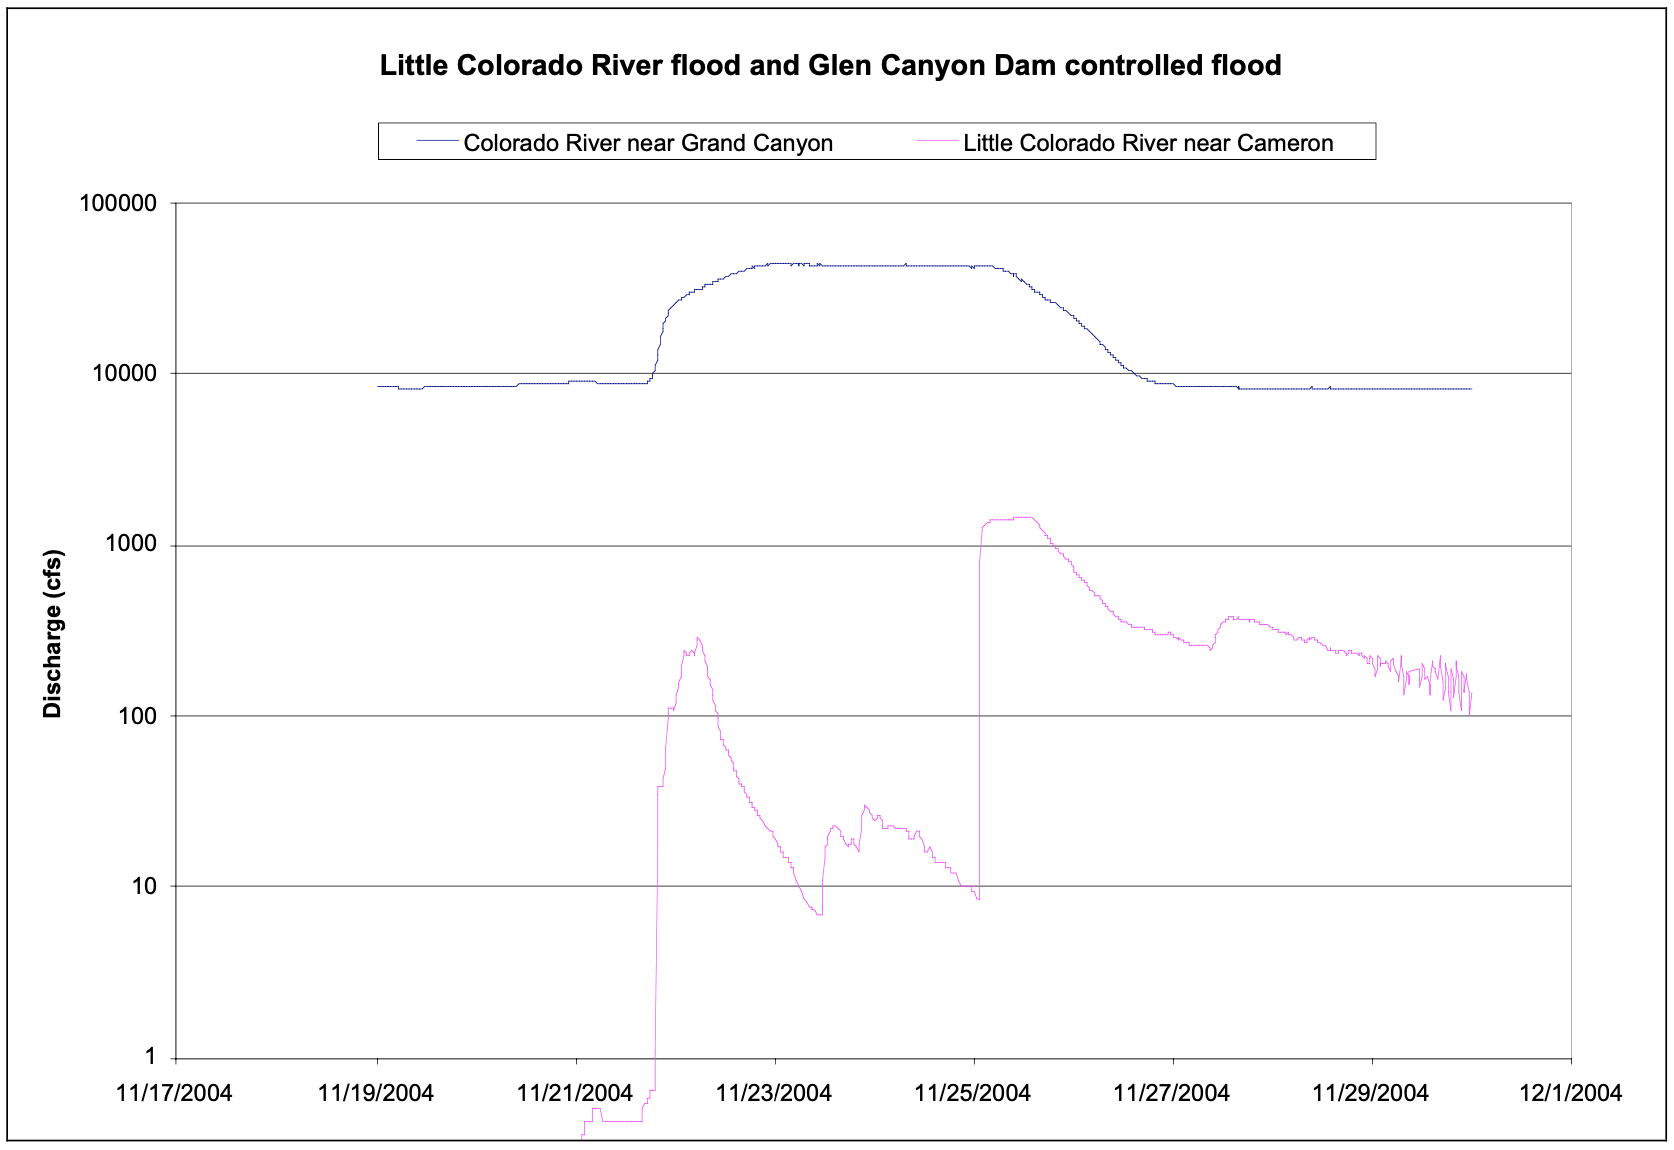 Hydrograph at Colorado River near Grand Canyon and Little Colorado River near Cameron. This event is hypothesized to be the cause of the mud deposit from Figure 1. Note: Discharge axis is in log-scale.